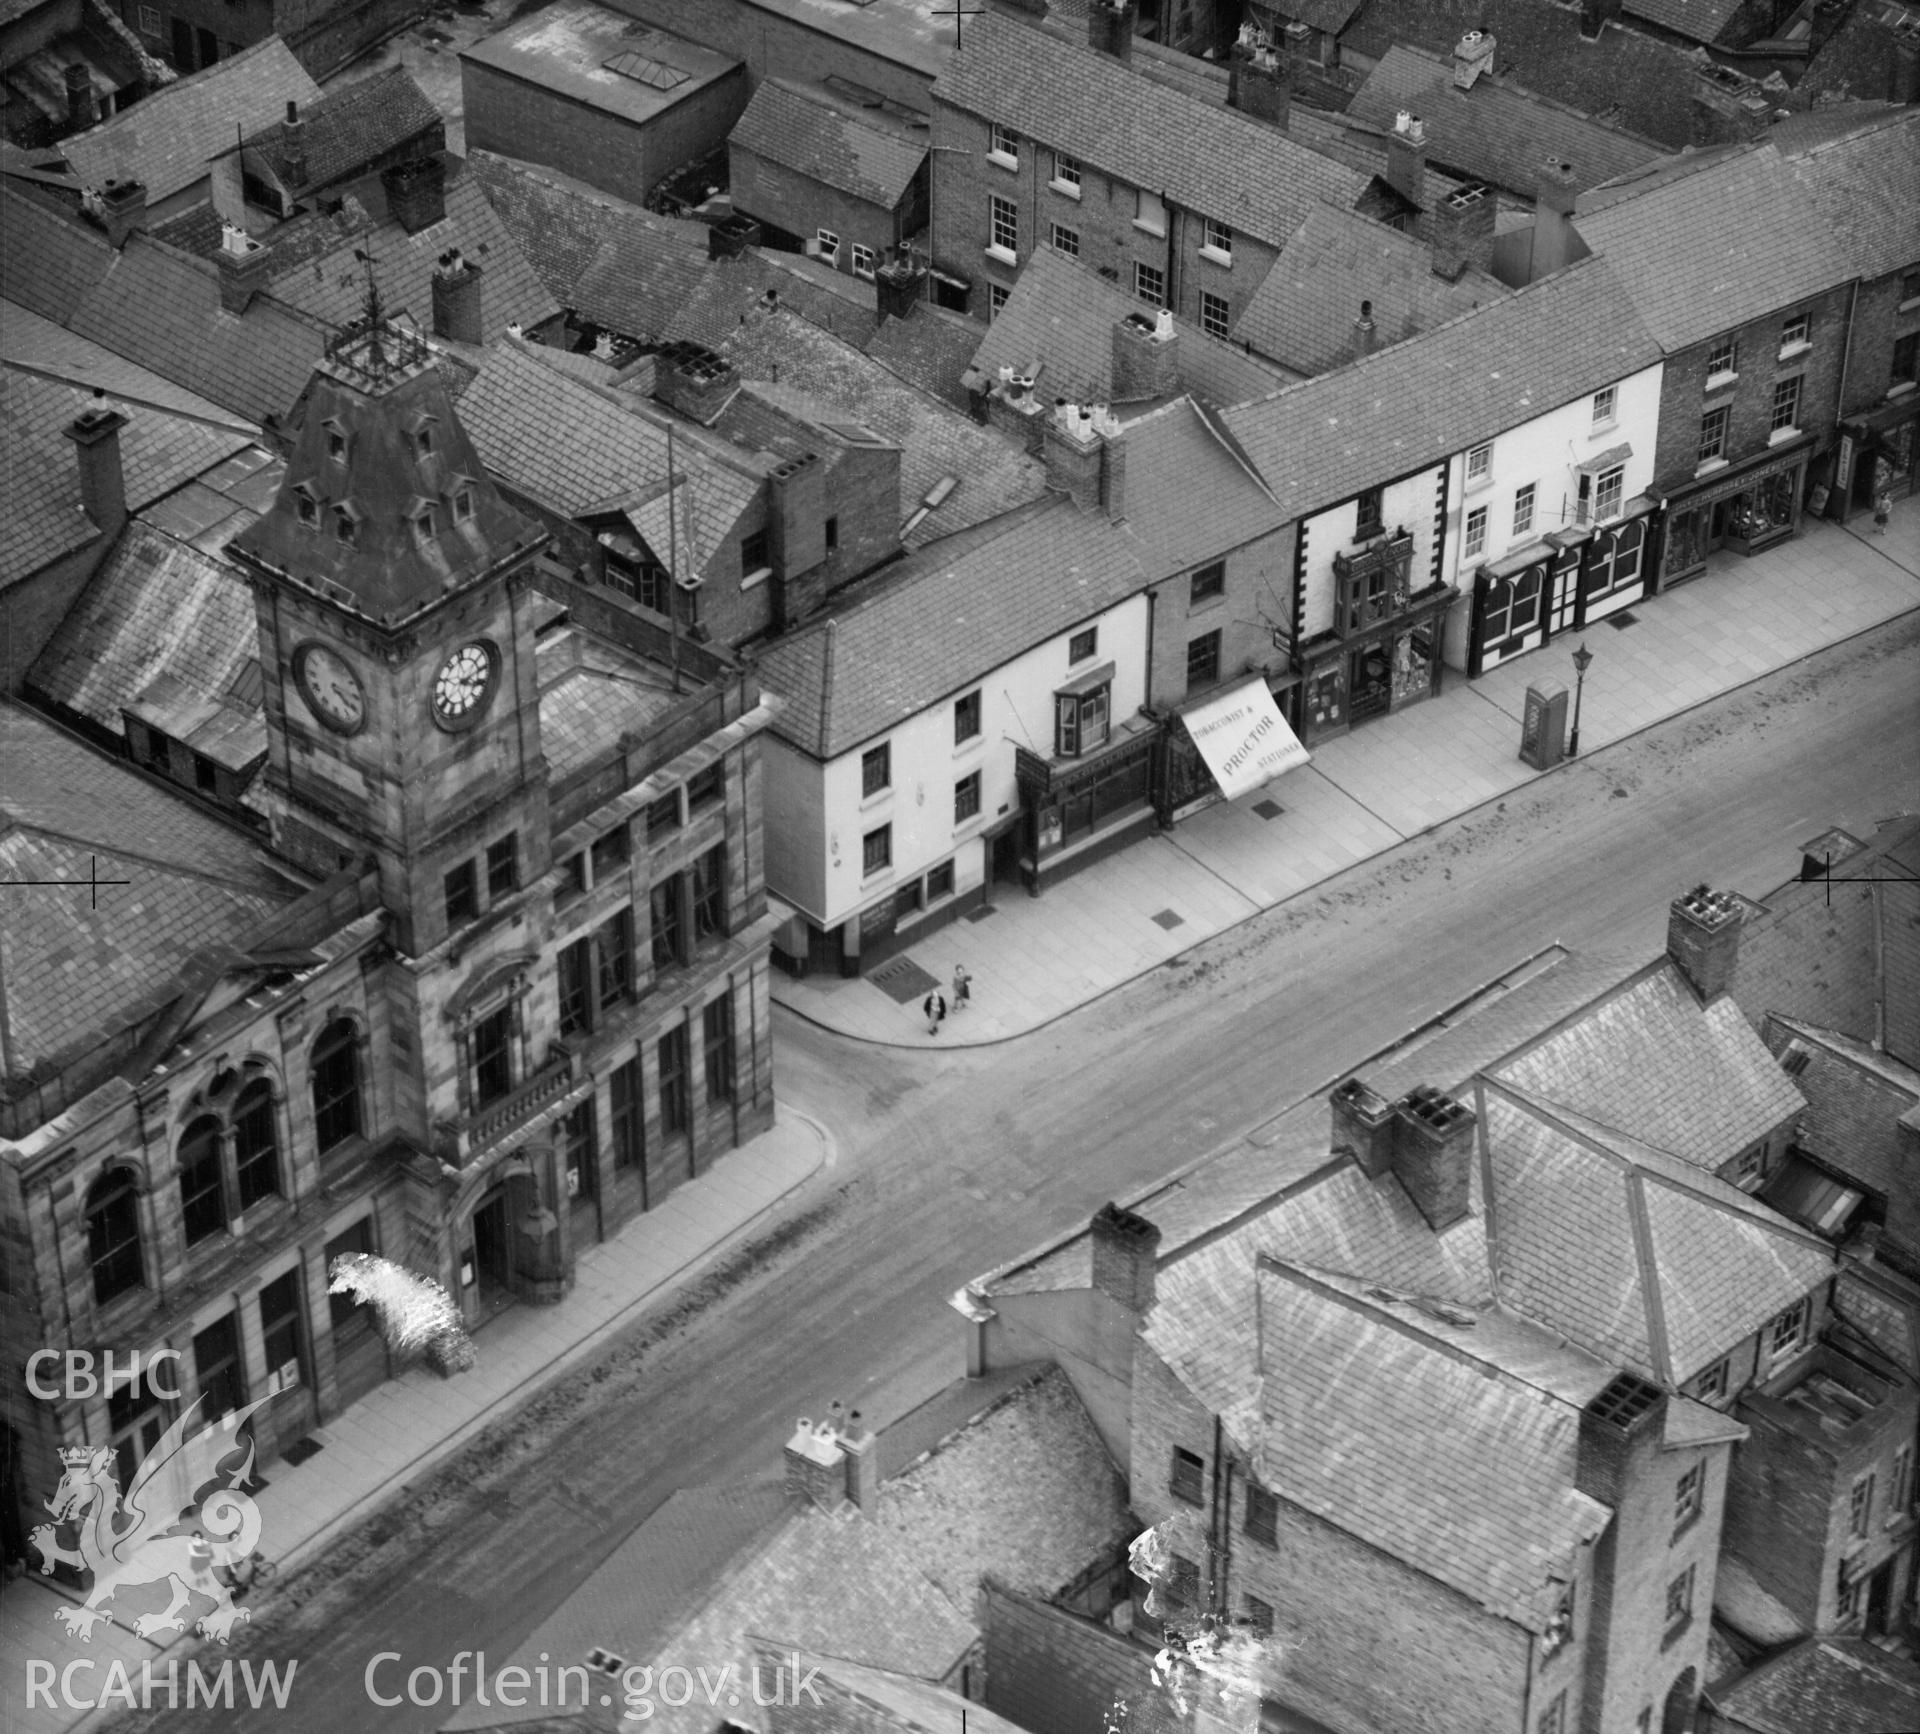 Black and white oblique aerial photograph showing Welshpool's Town Hall and Market in 1947, from Aerofilms album Merionethshire and Montgomeryshire, taken by Aerofilms Ltd and dated 1947.